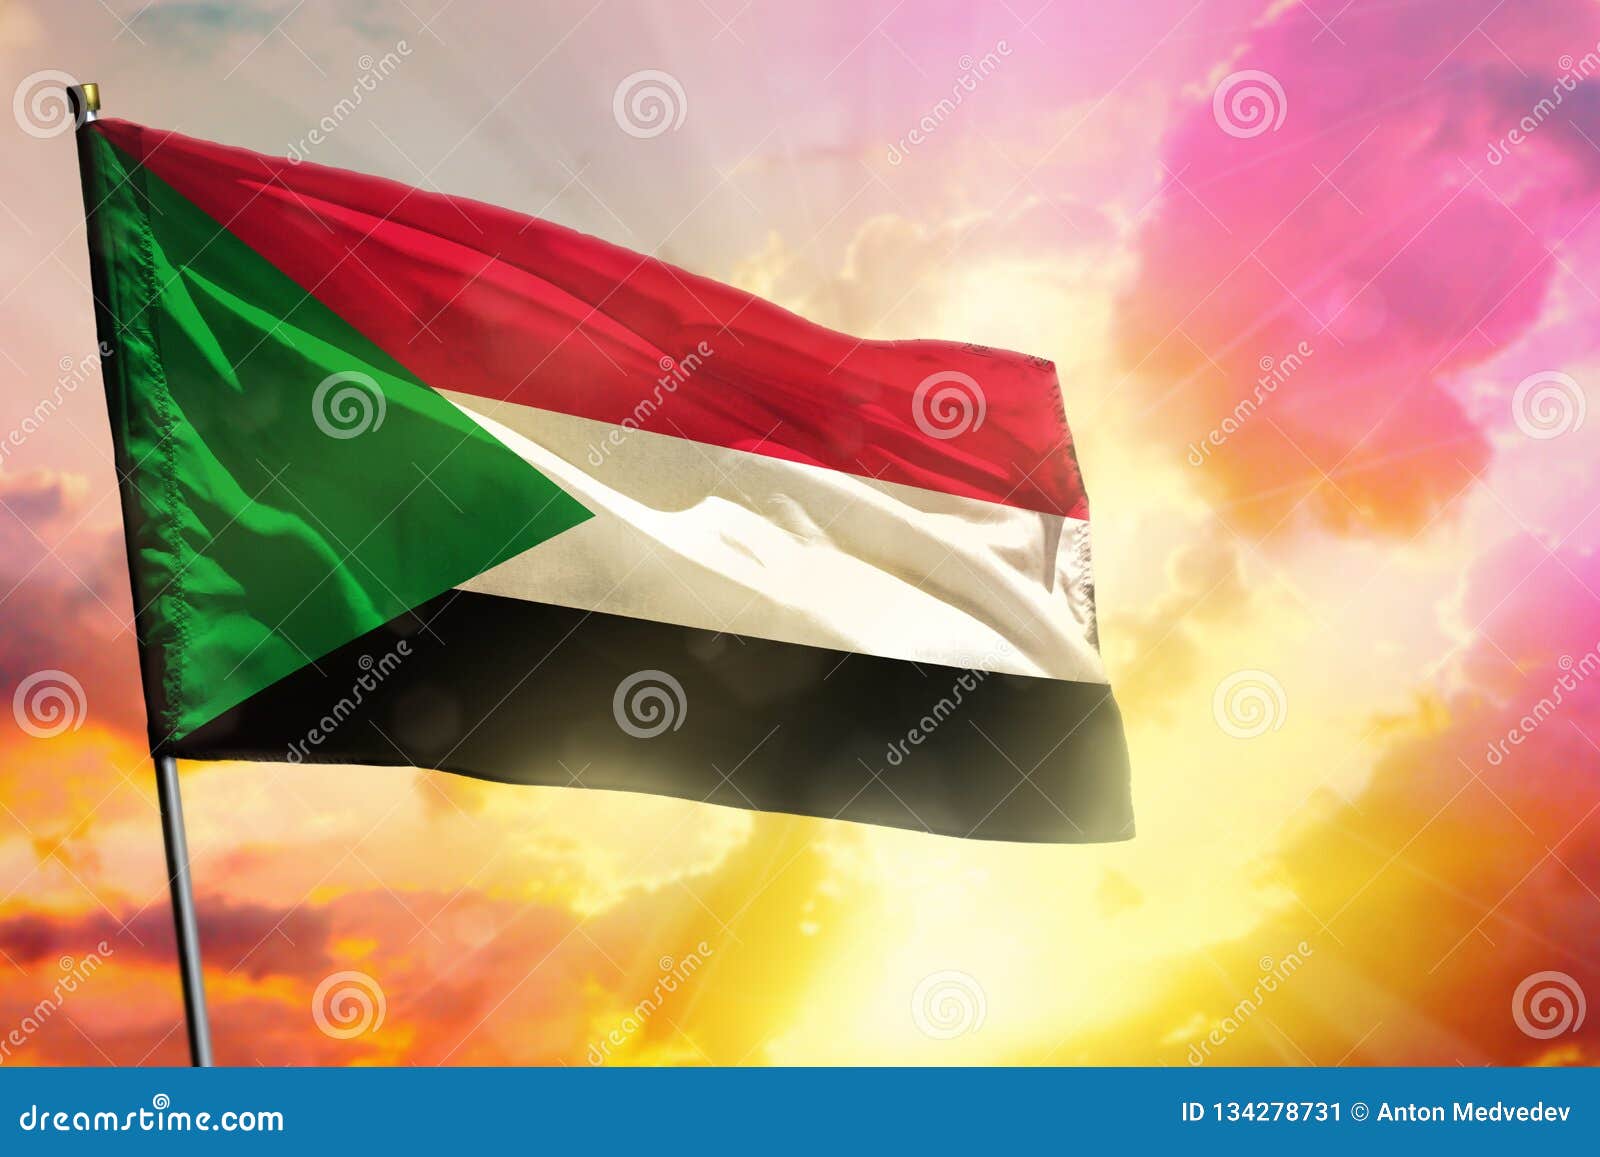 fluttering sudan flag on beautiful colorful sunset or sunrise background. success concept